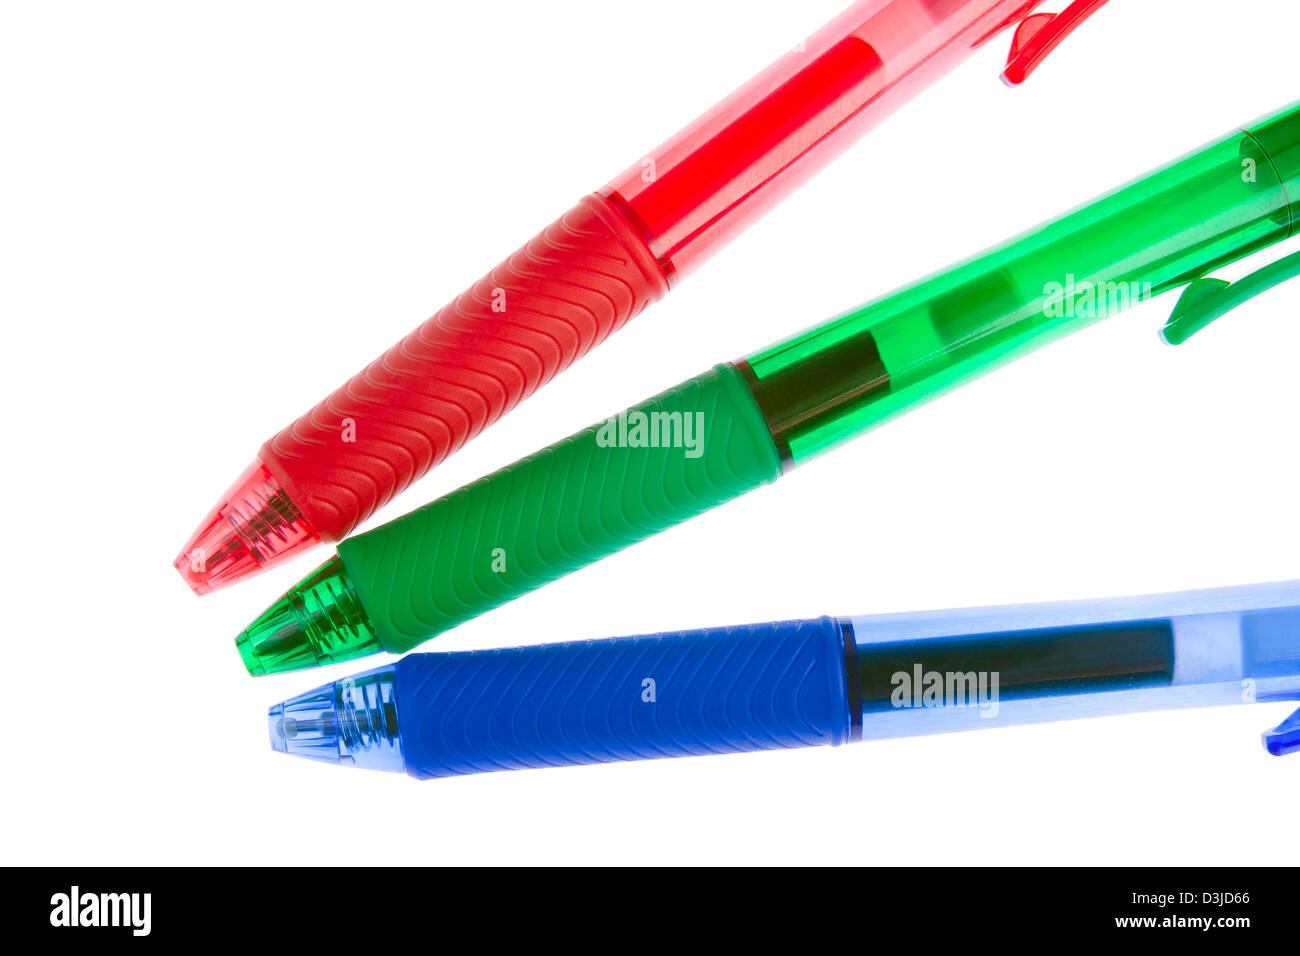 Red, green and blue ballpoint pens on white background Stock Photo